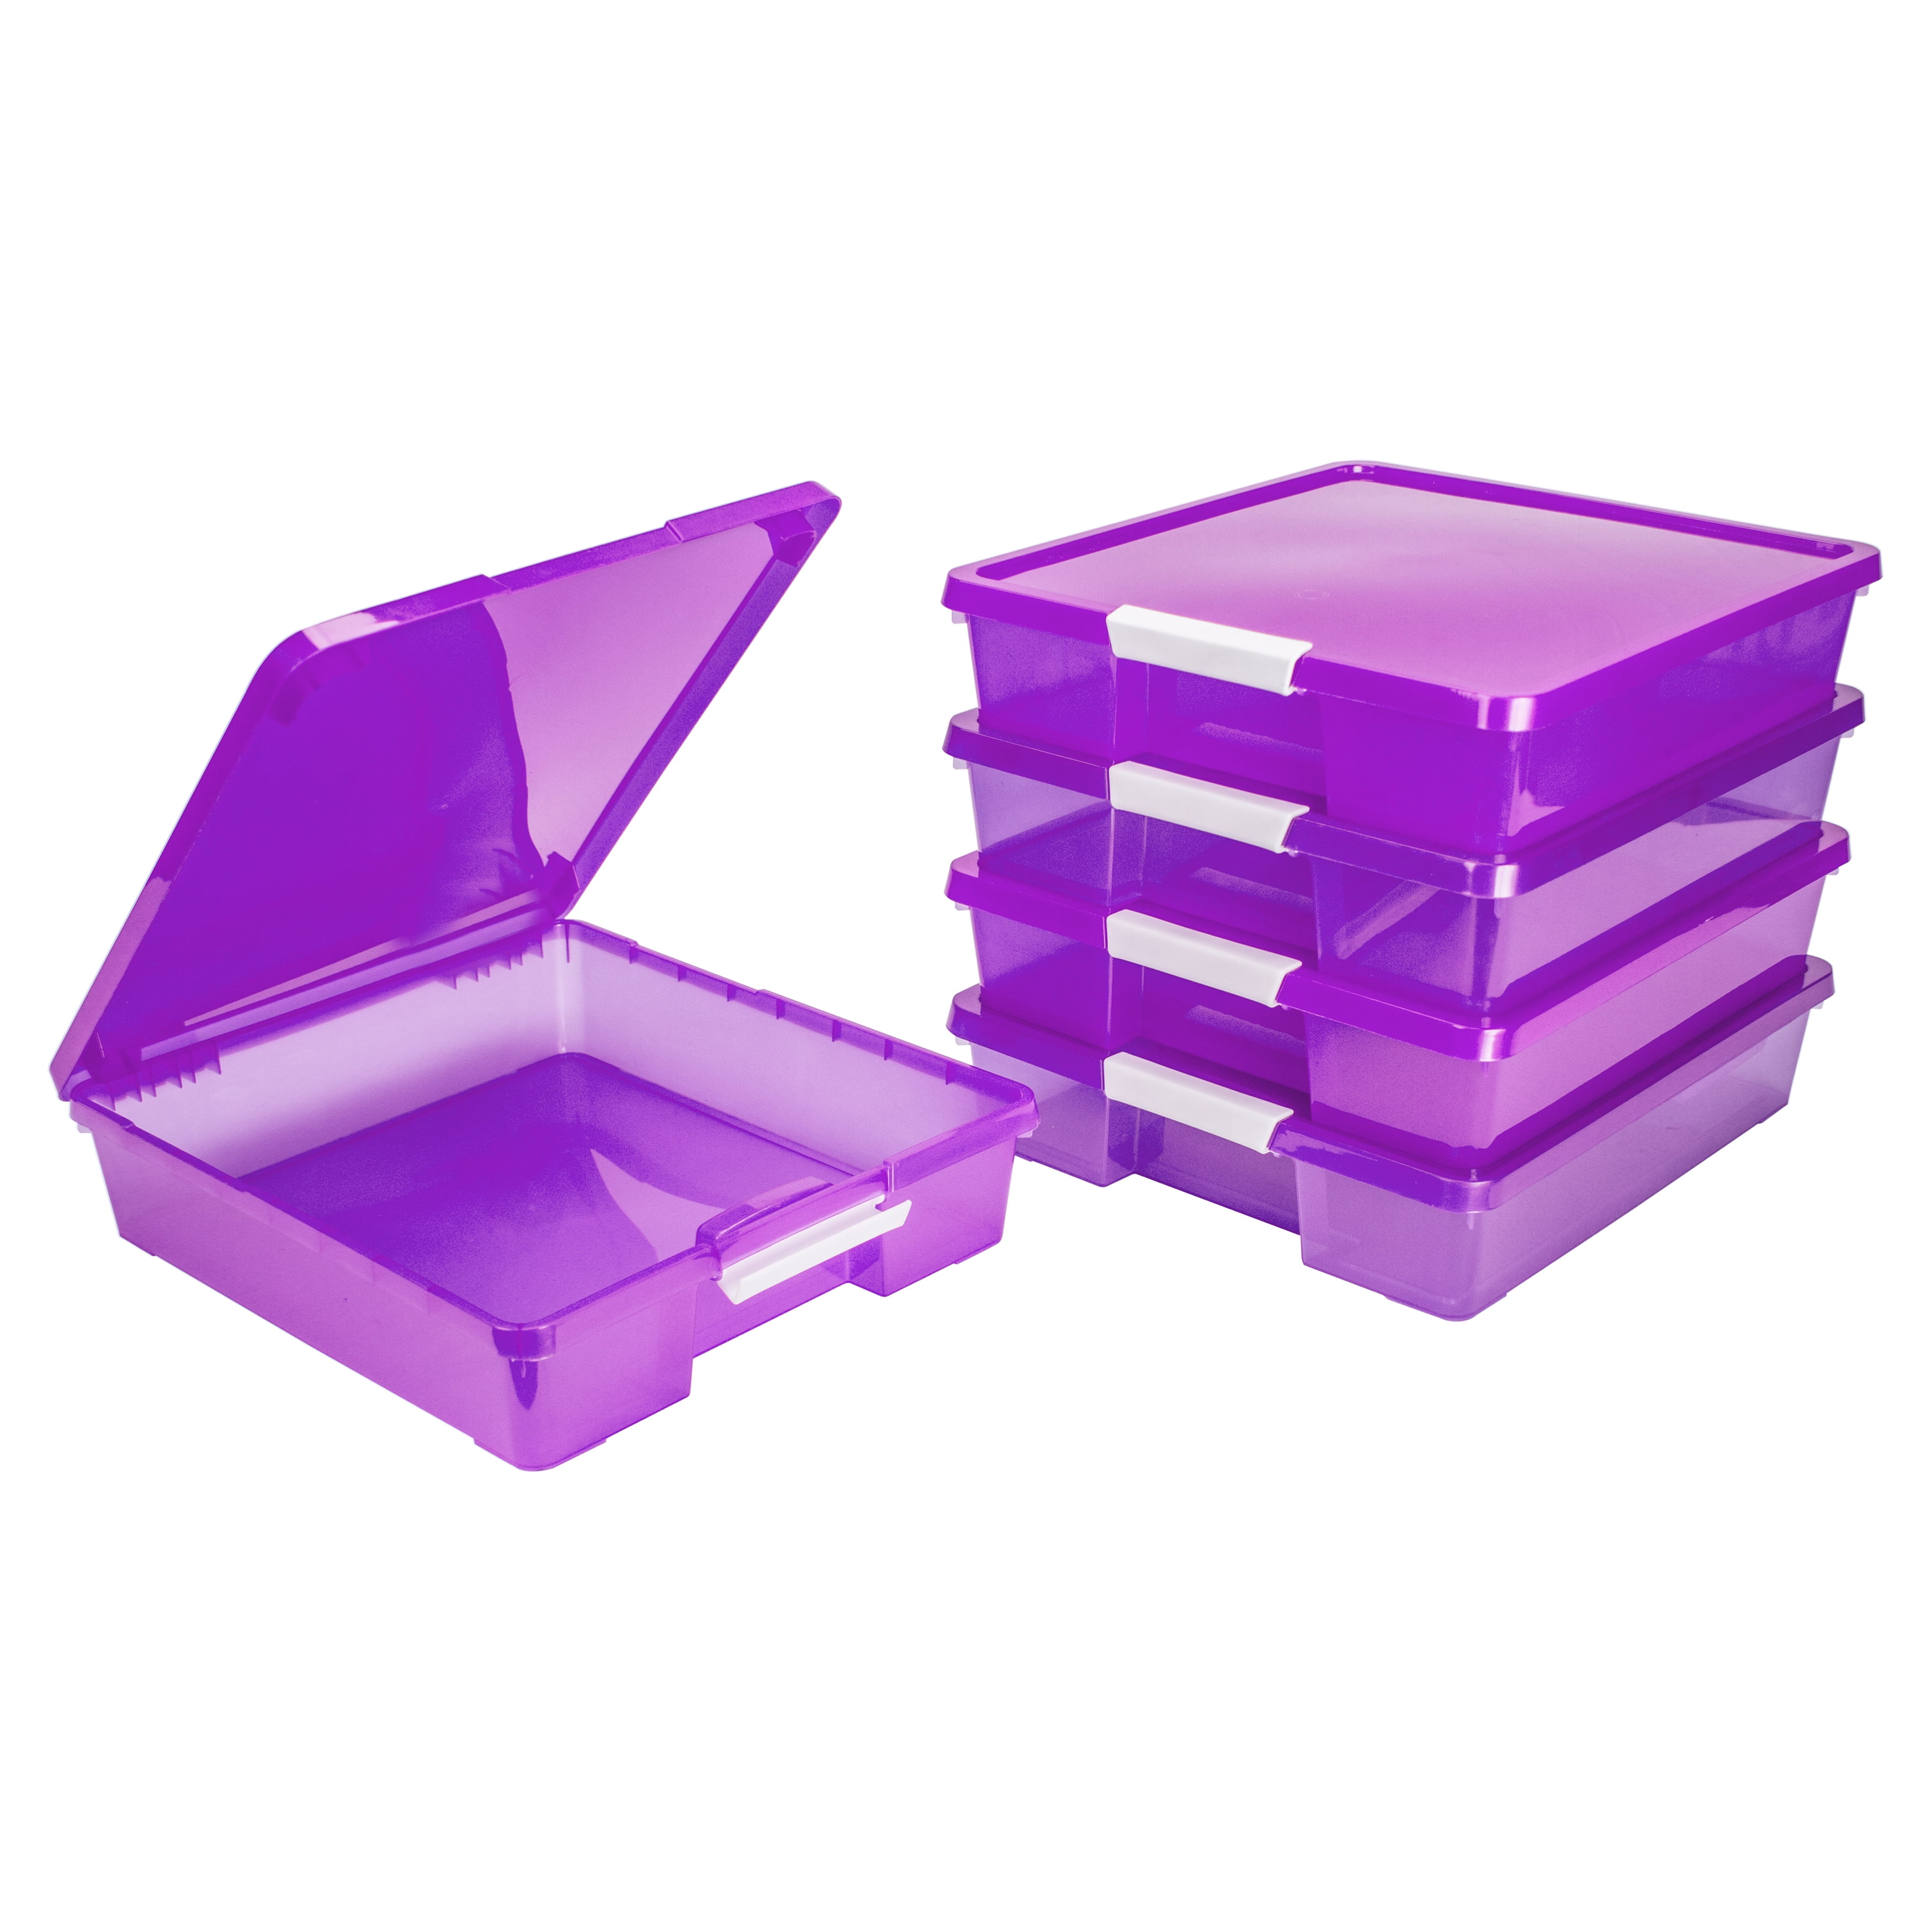 Storex Classroom Student Project Box, 12 x 12 Inches, Transparent Purple, 5-Pack